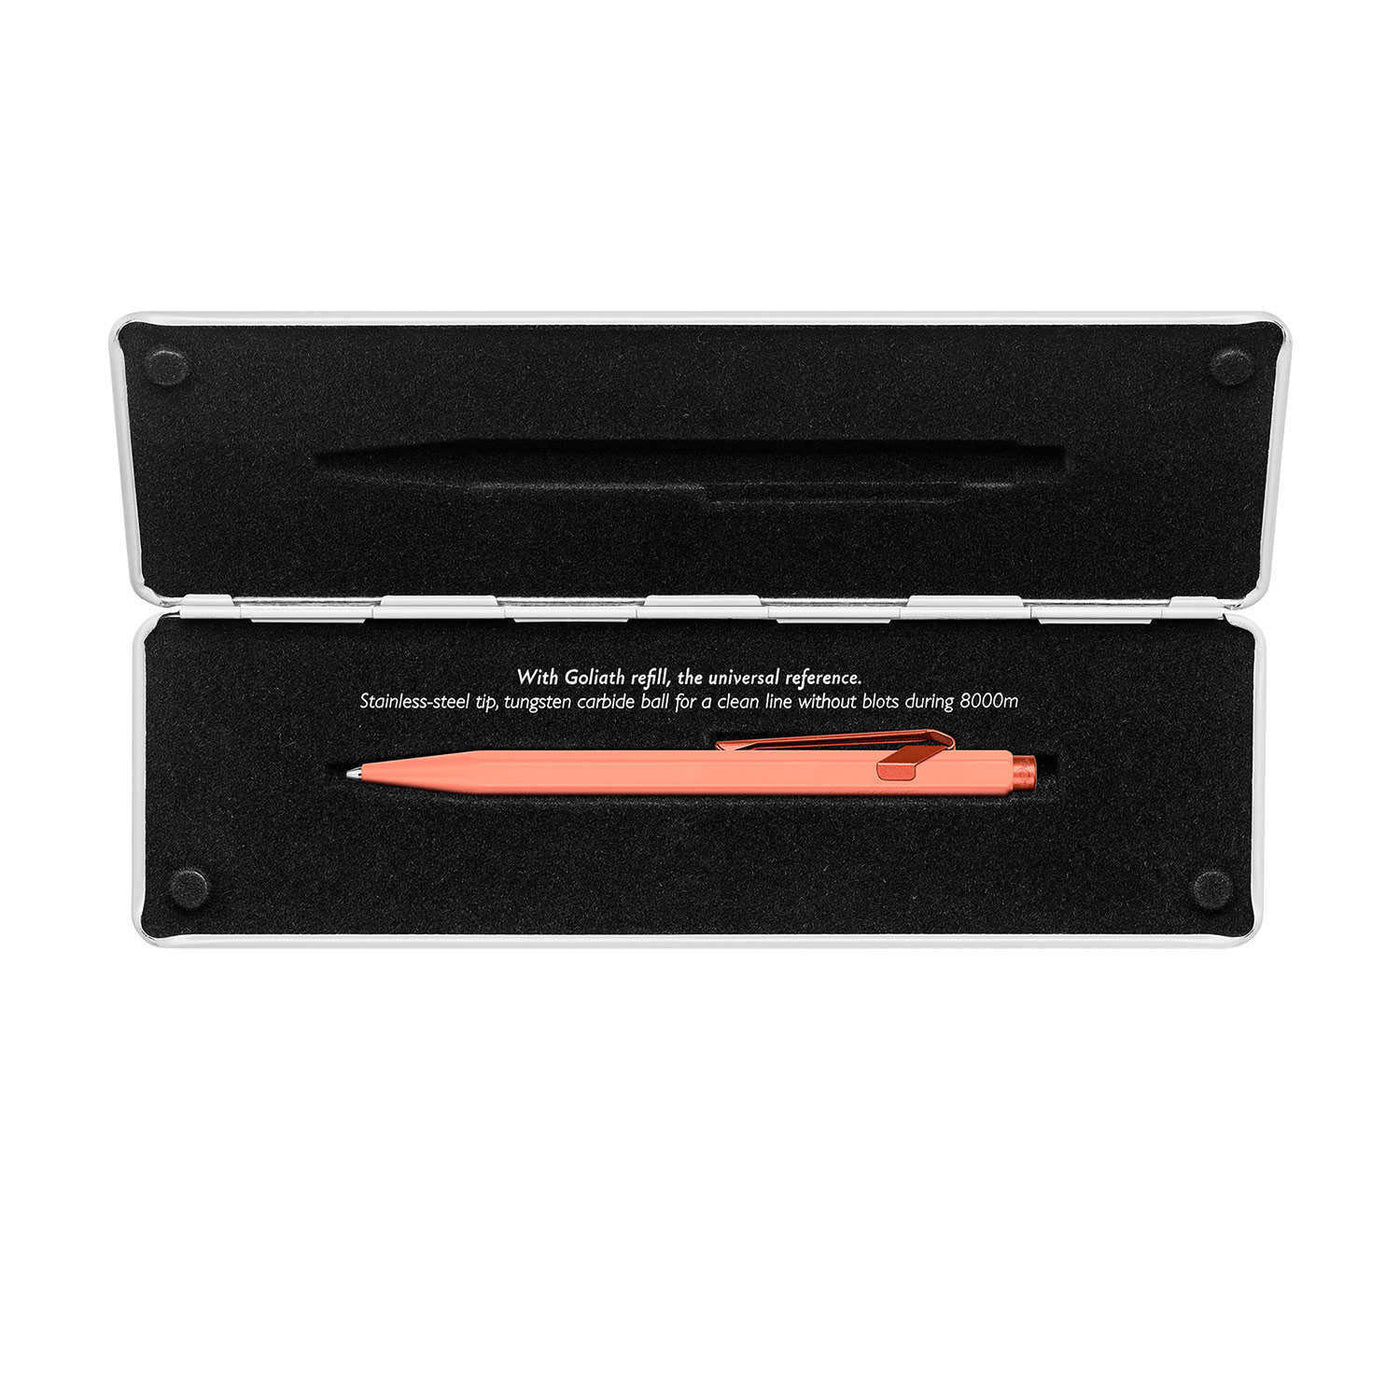 Caran d'Ache 849 Claim Your Style Ball Pen - Tangerine (Limited Edition) 4